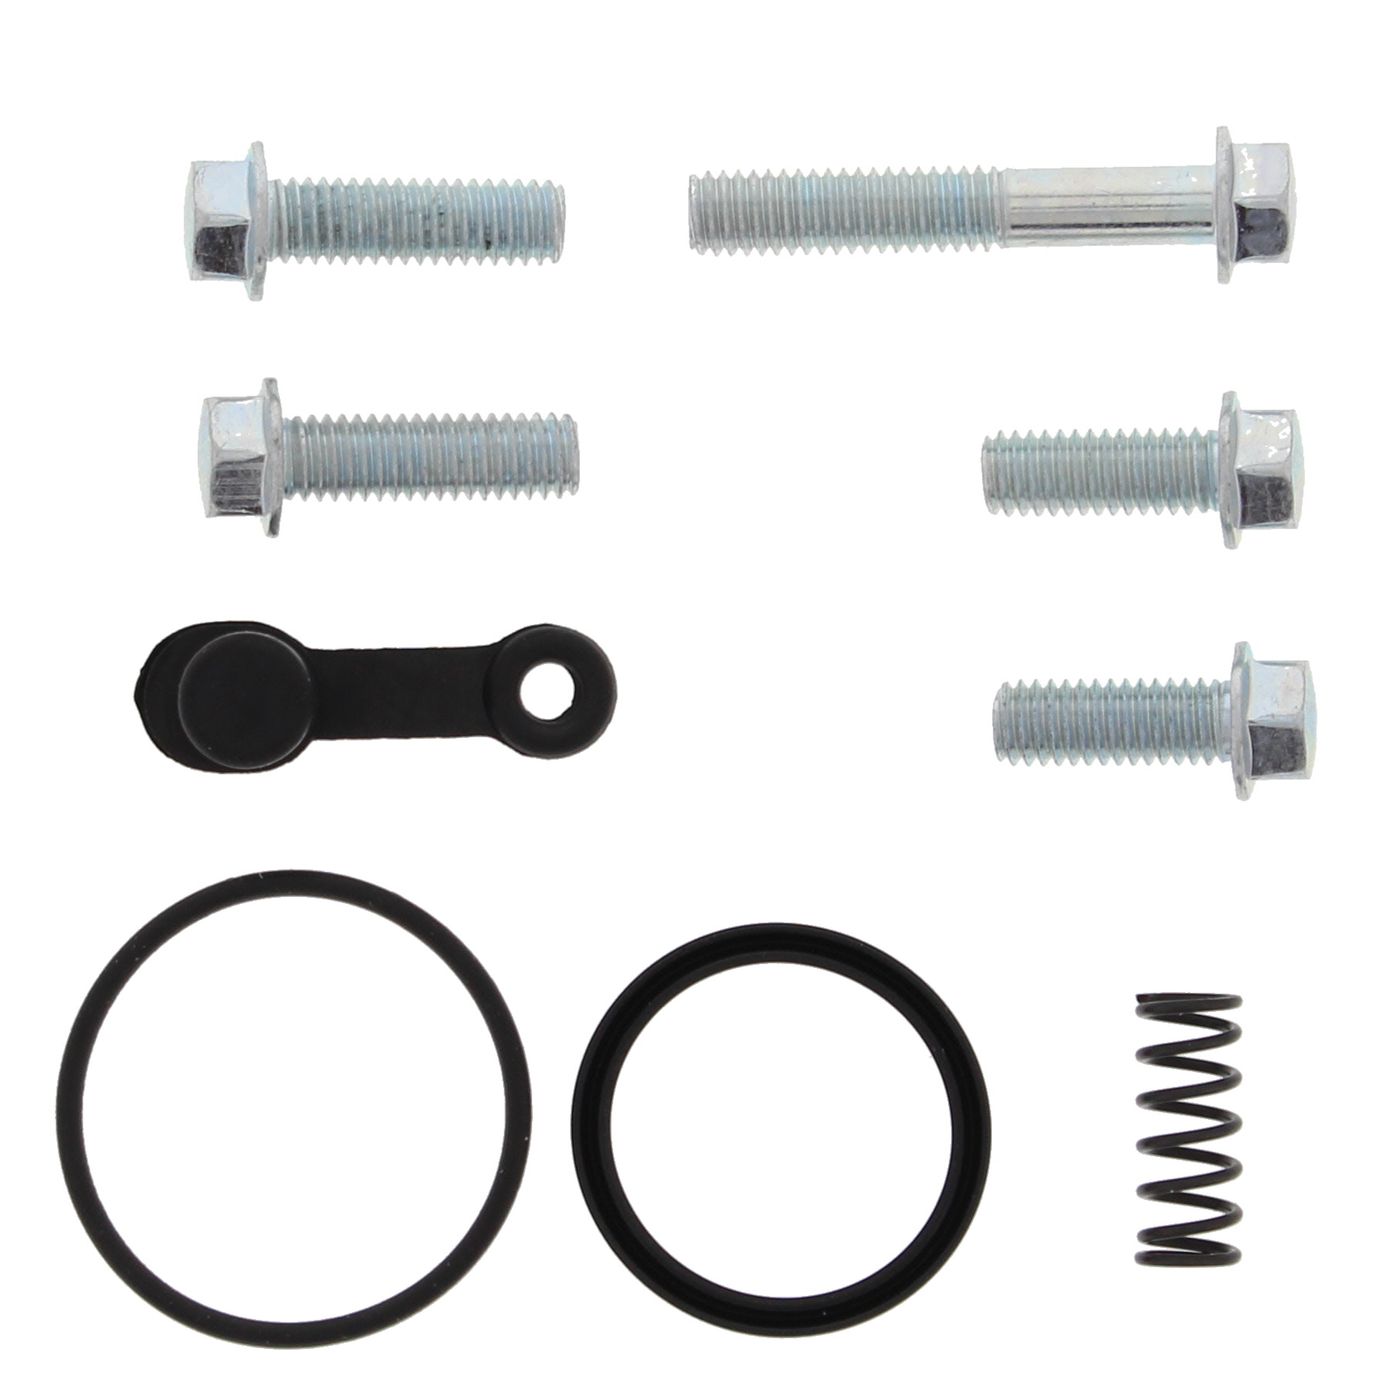 Wrp Clutch Slave Cylinder Kits - WRP186008 image